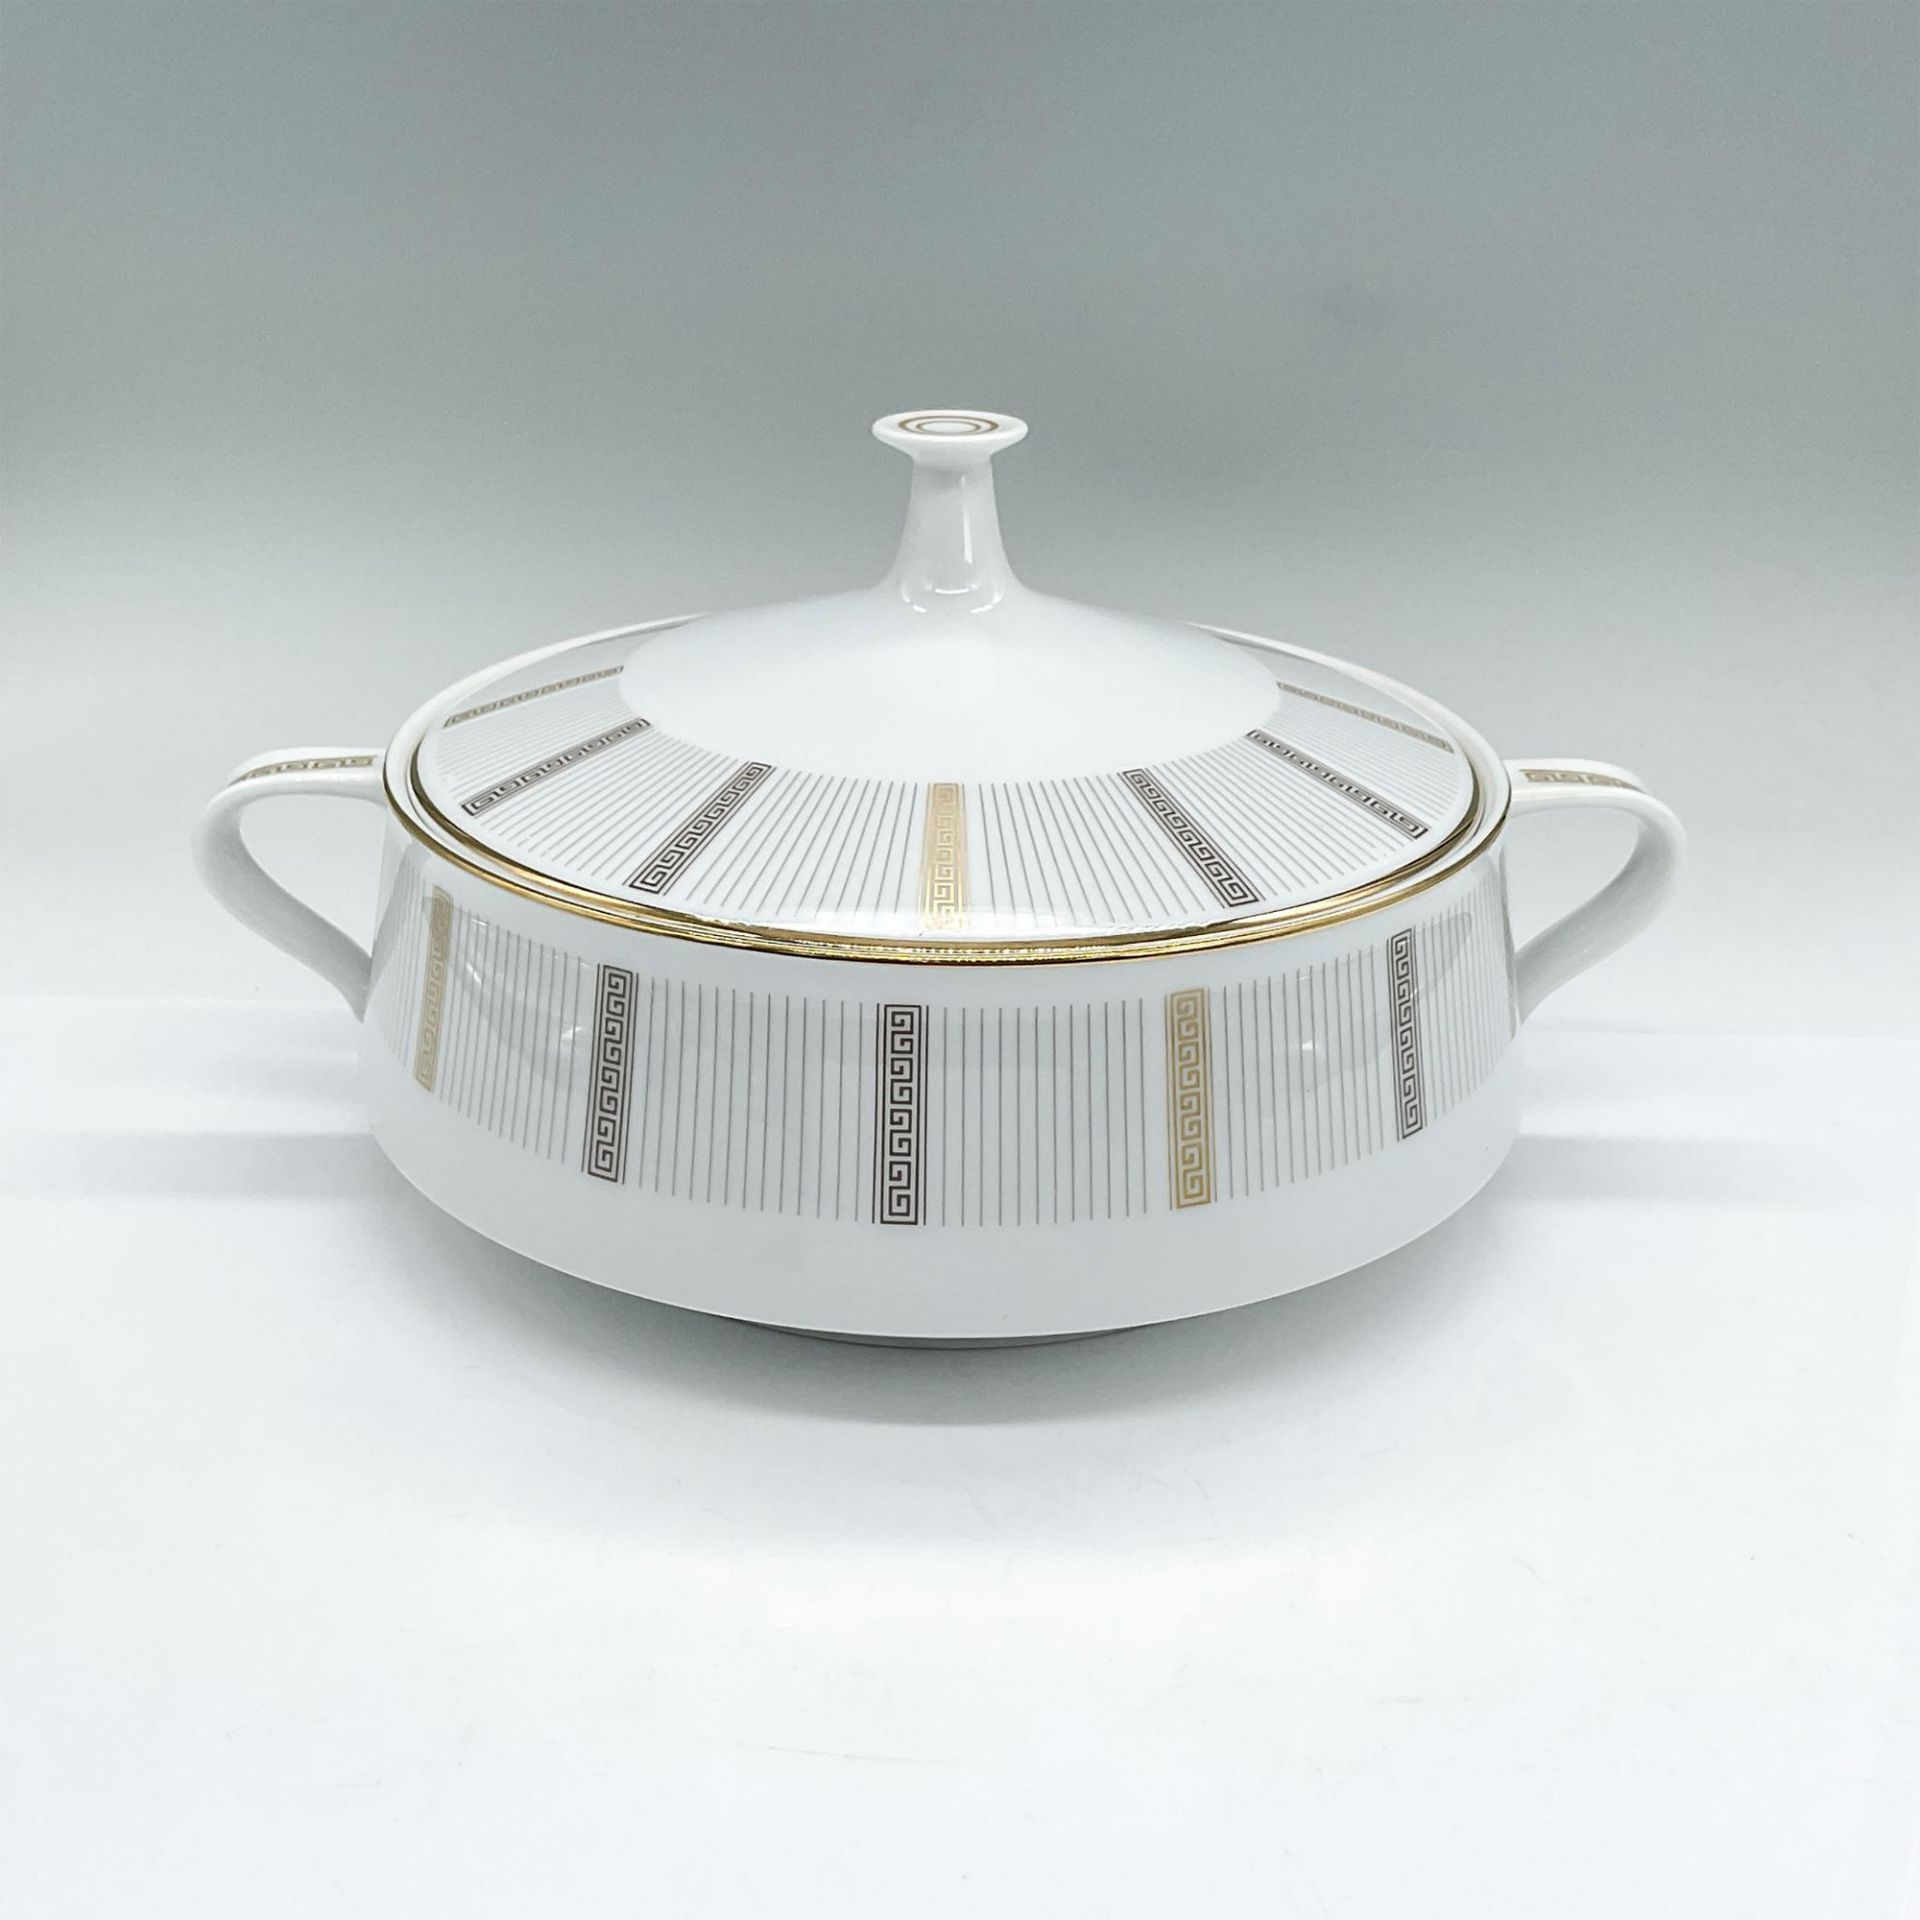 Noritake Porcelain Covered Serving Dish, Humoresque Pattern - Image 2 of 3